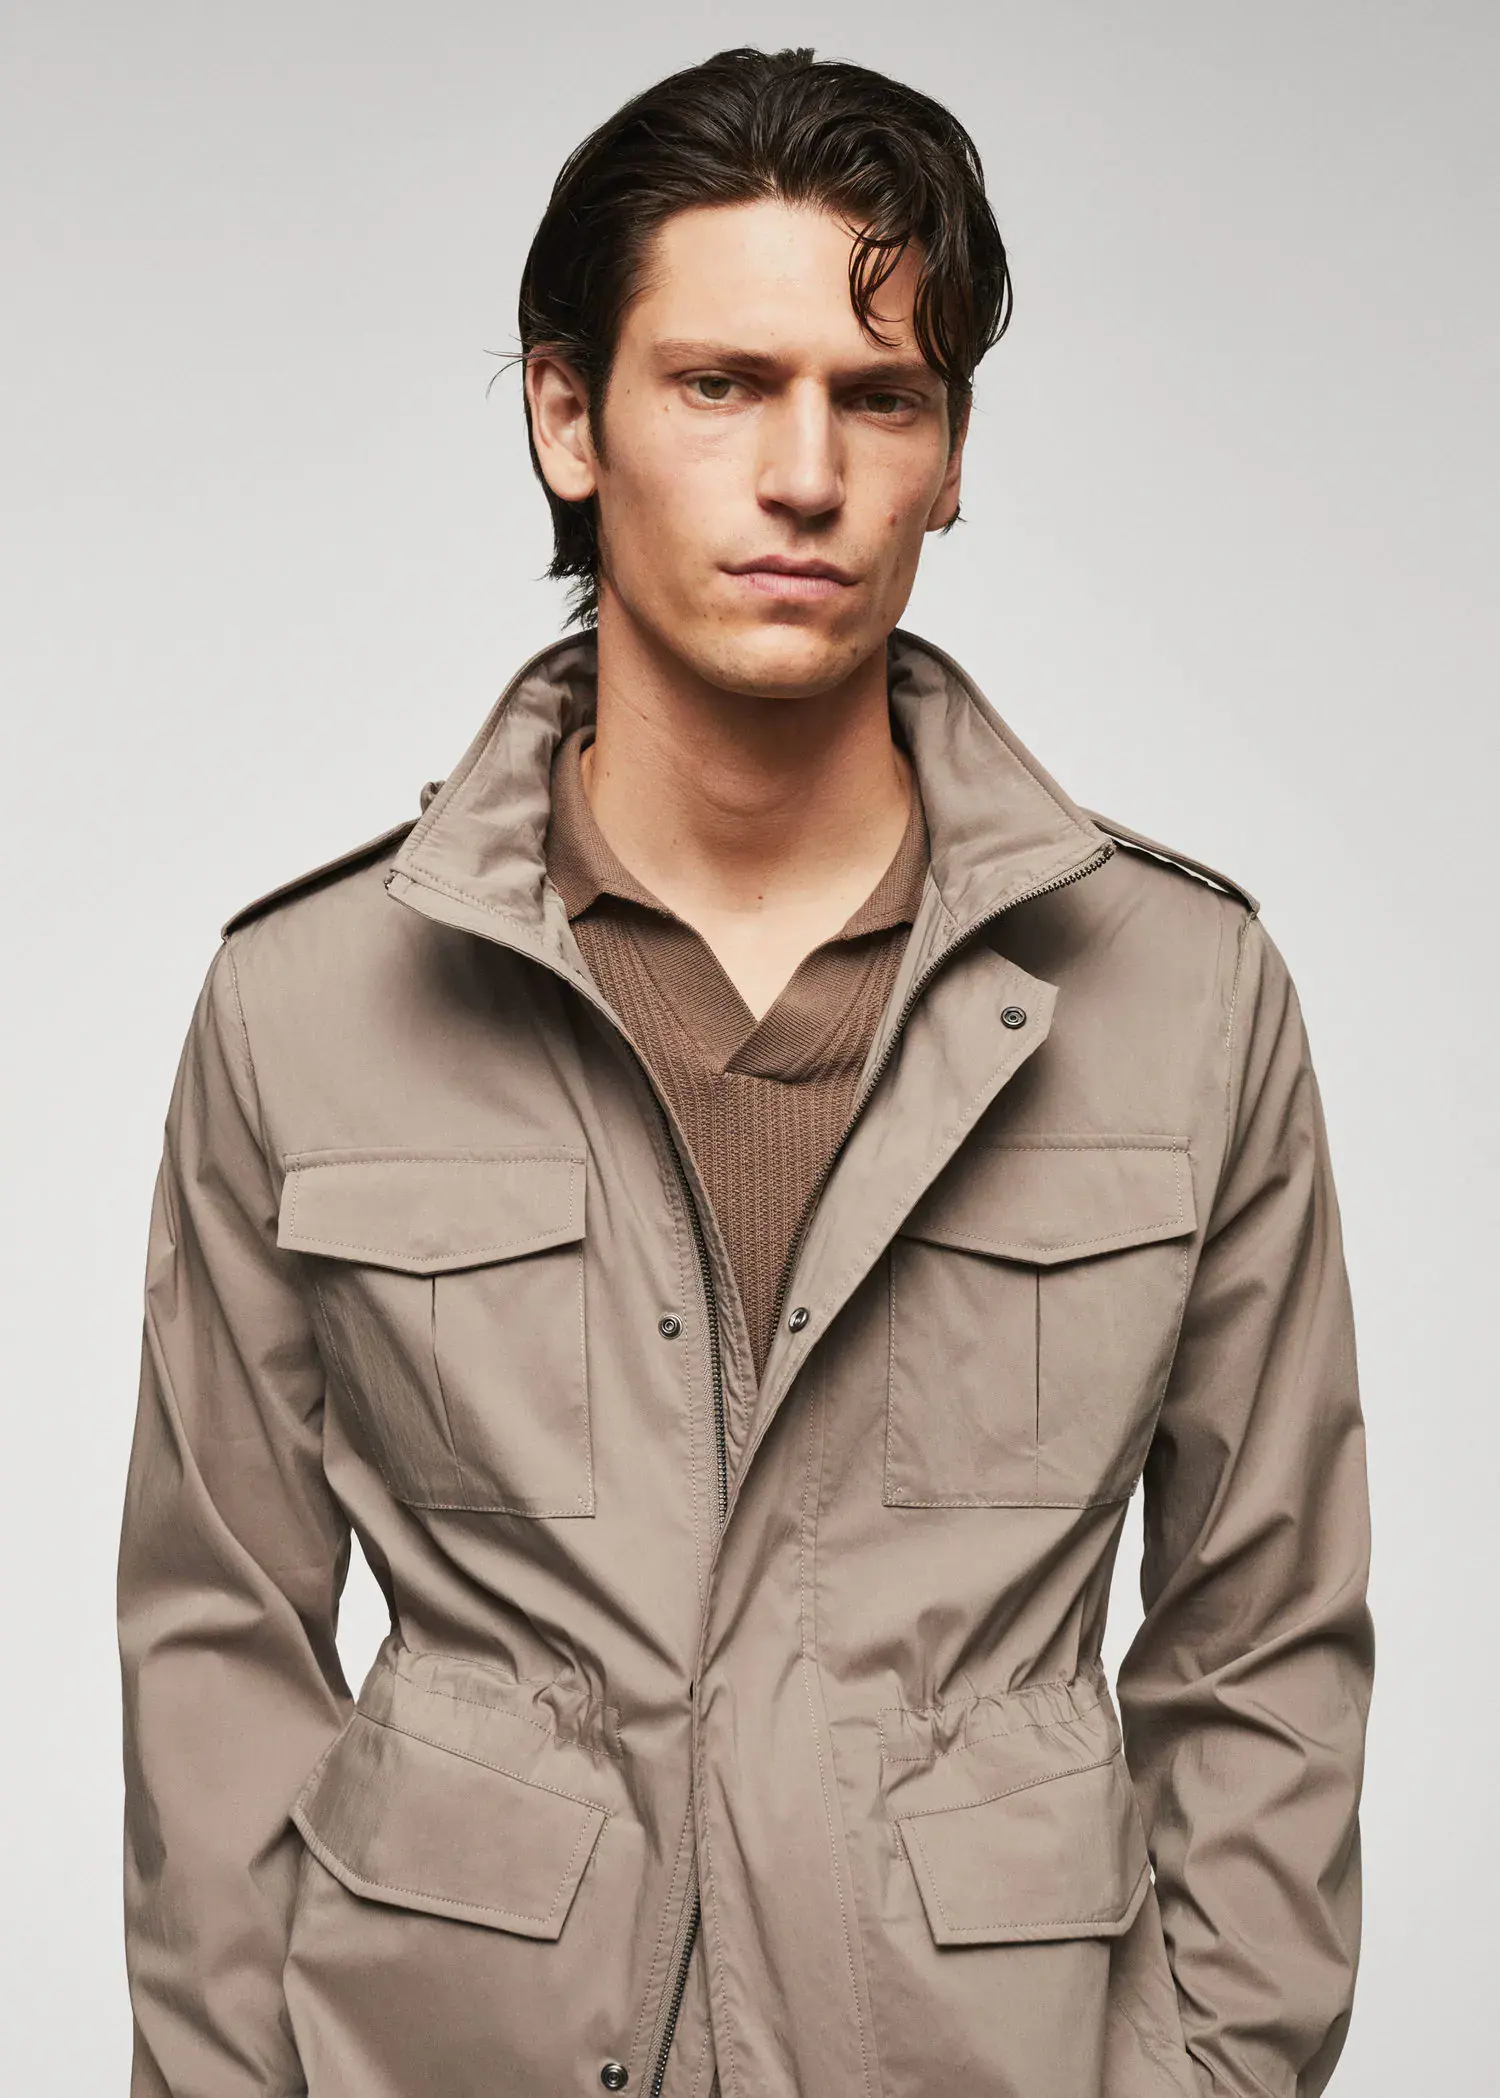 Mango Lightweight saharian jacket with pockets. a man in a tan jacket is posing for a picture. 